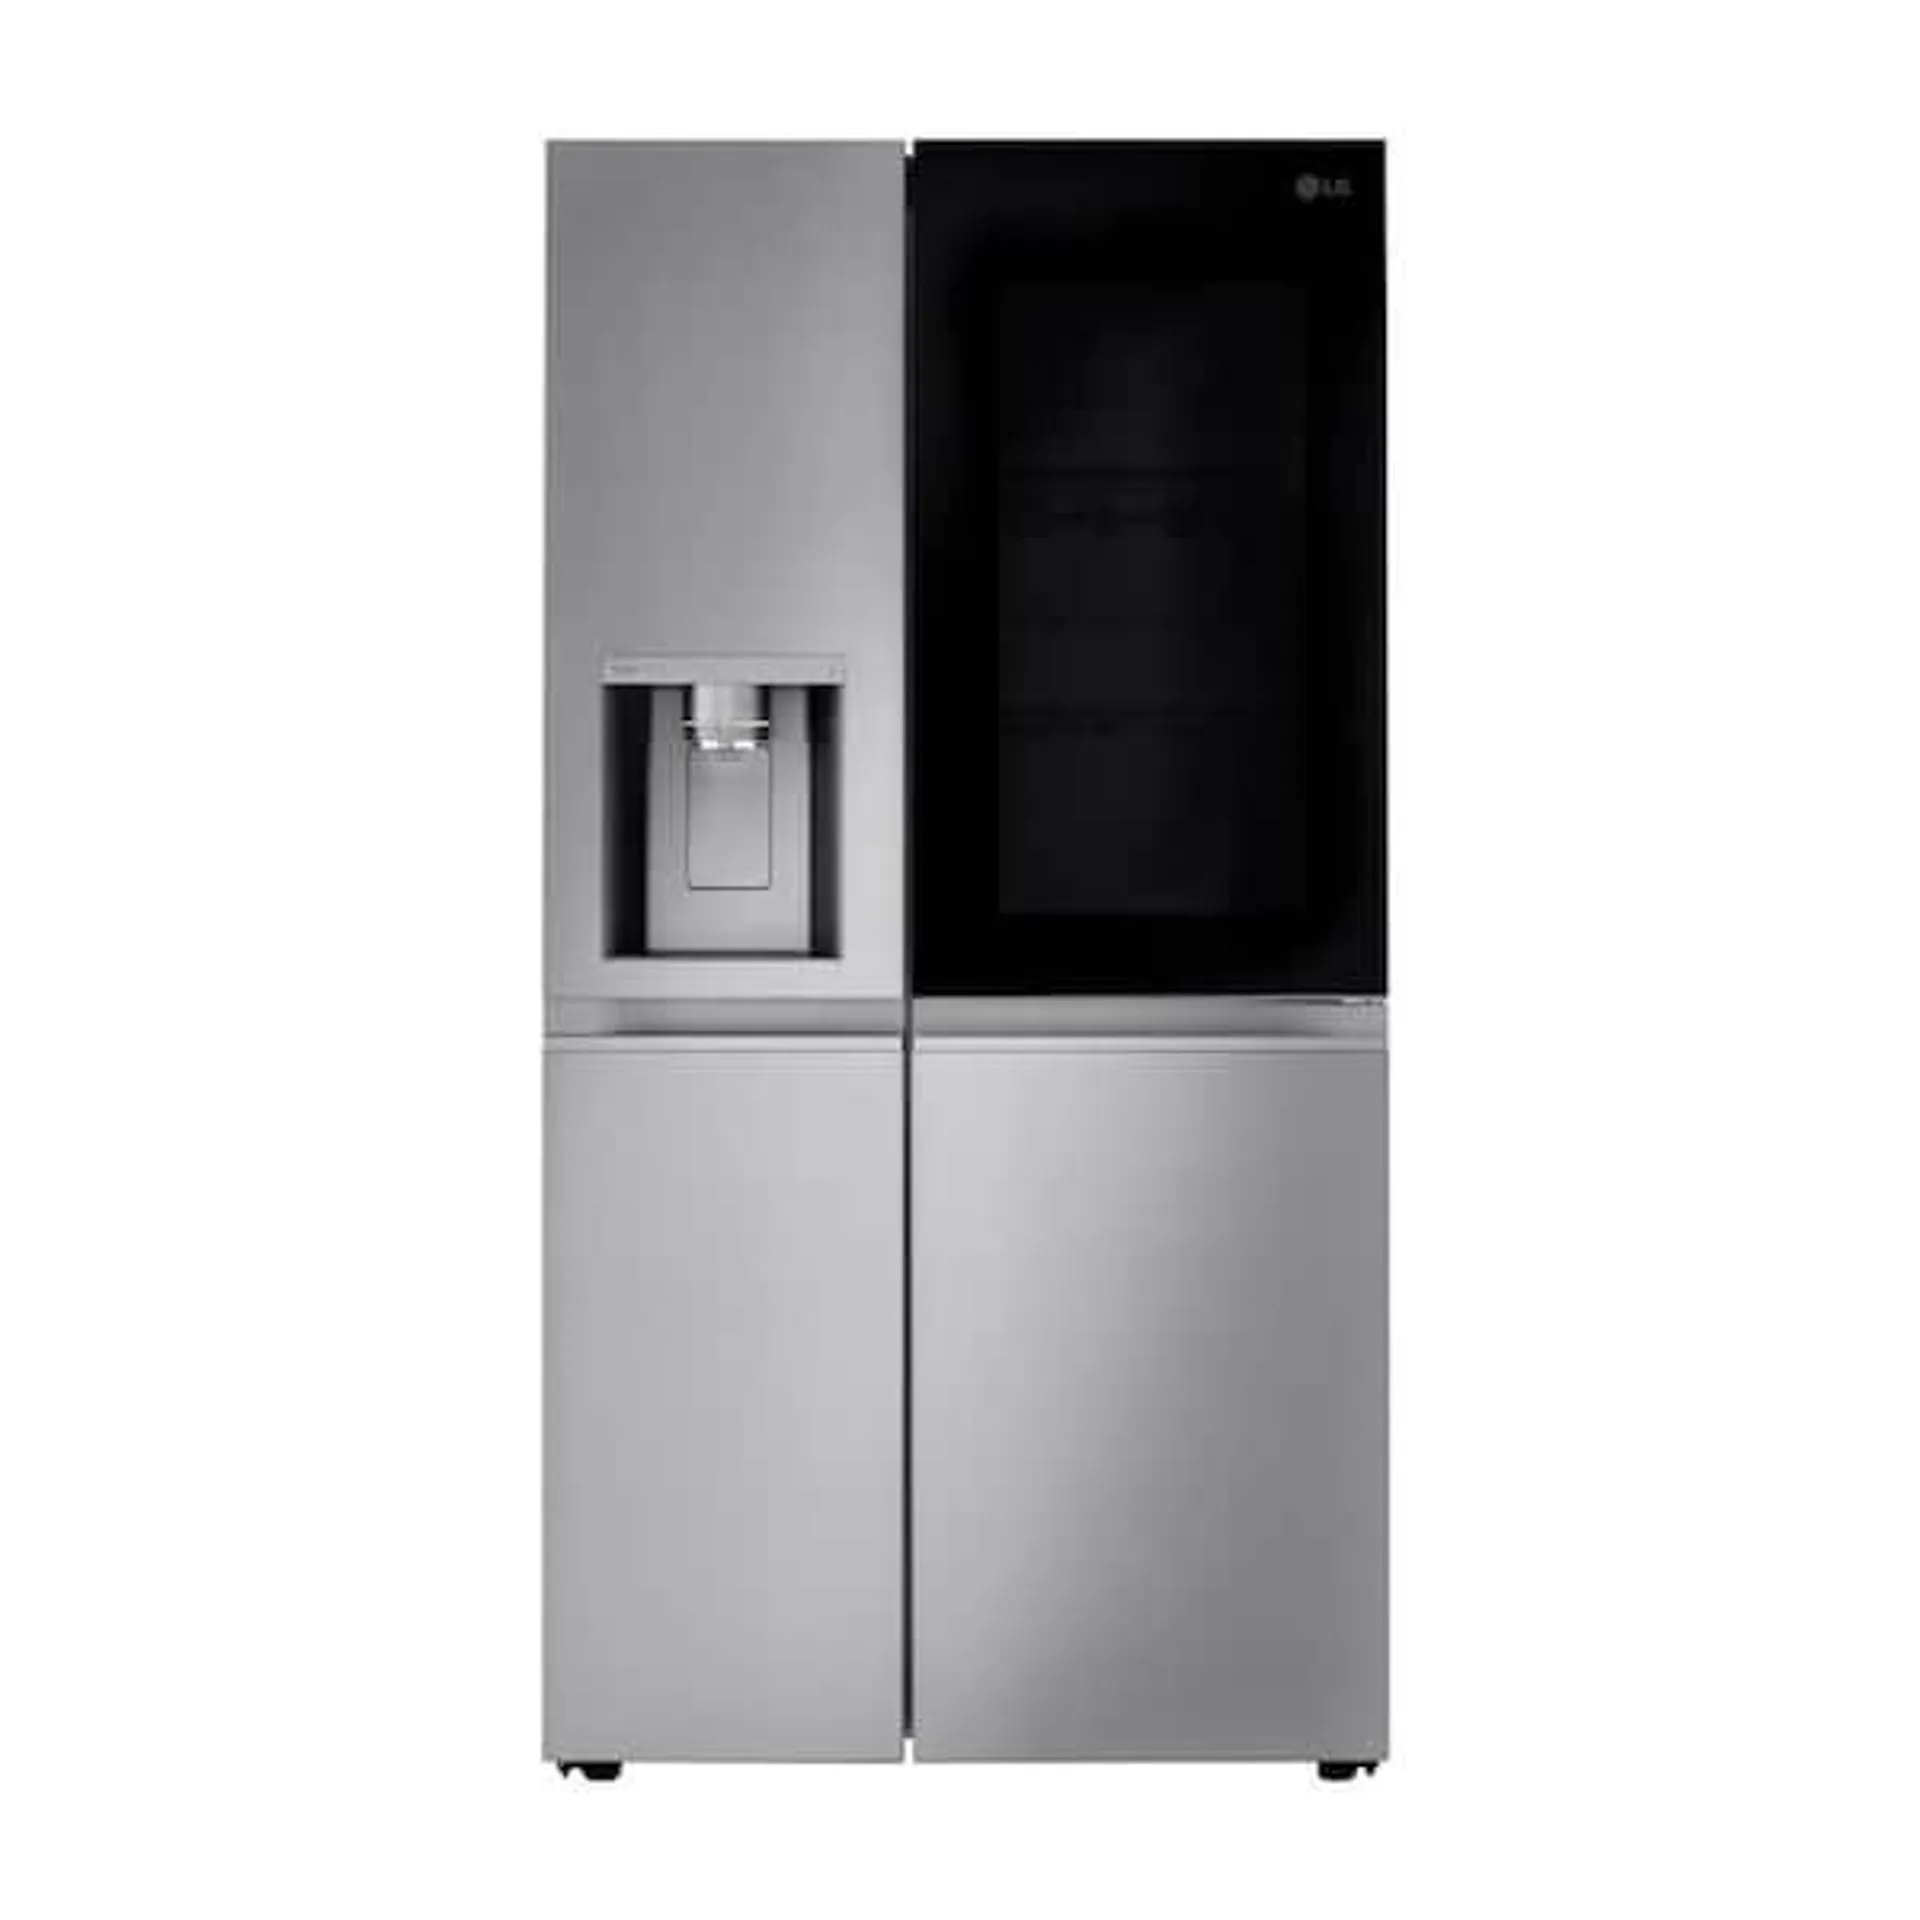 27 cu. ft. Side by Side Smart Refrigerator w/ InstaView and Craft Ice in PrintProof Stainless Steel